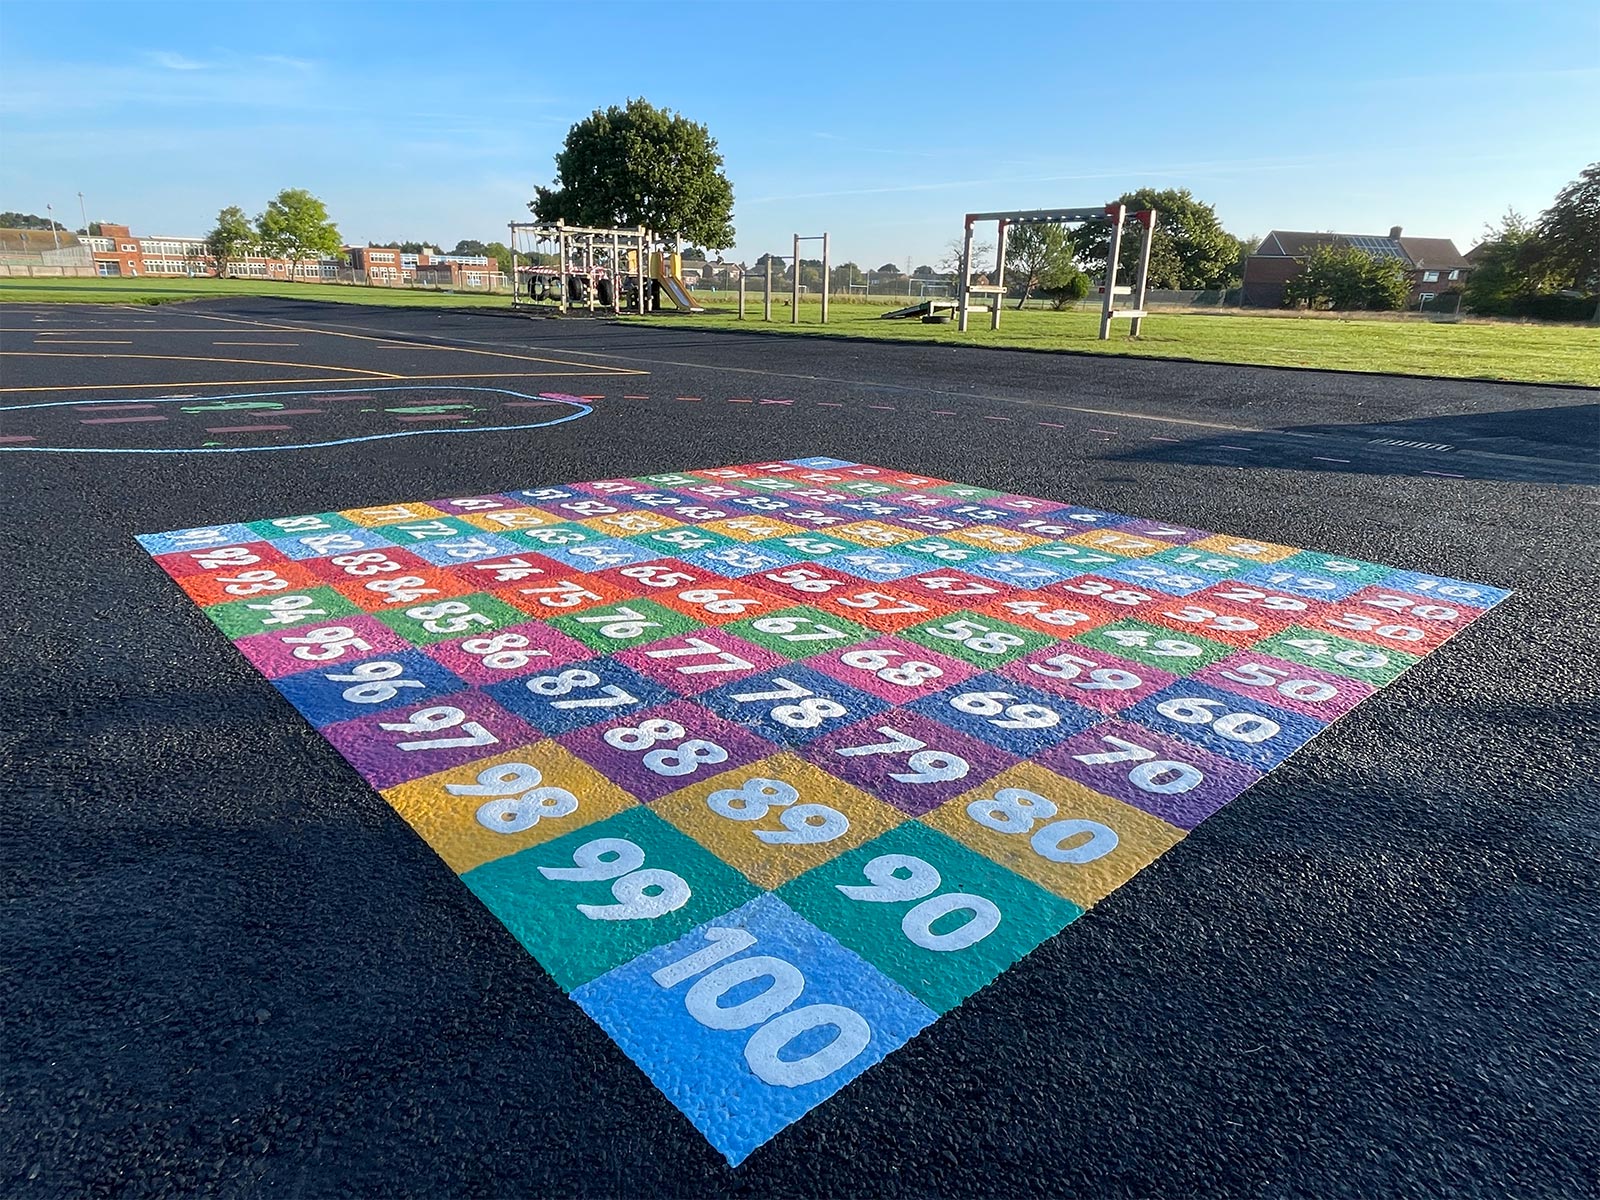 Somerford-Primary-School-Solid-Number-Grid-Playground-Marking-3